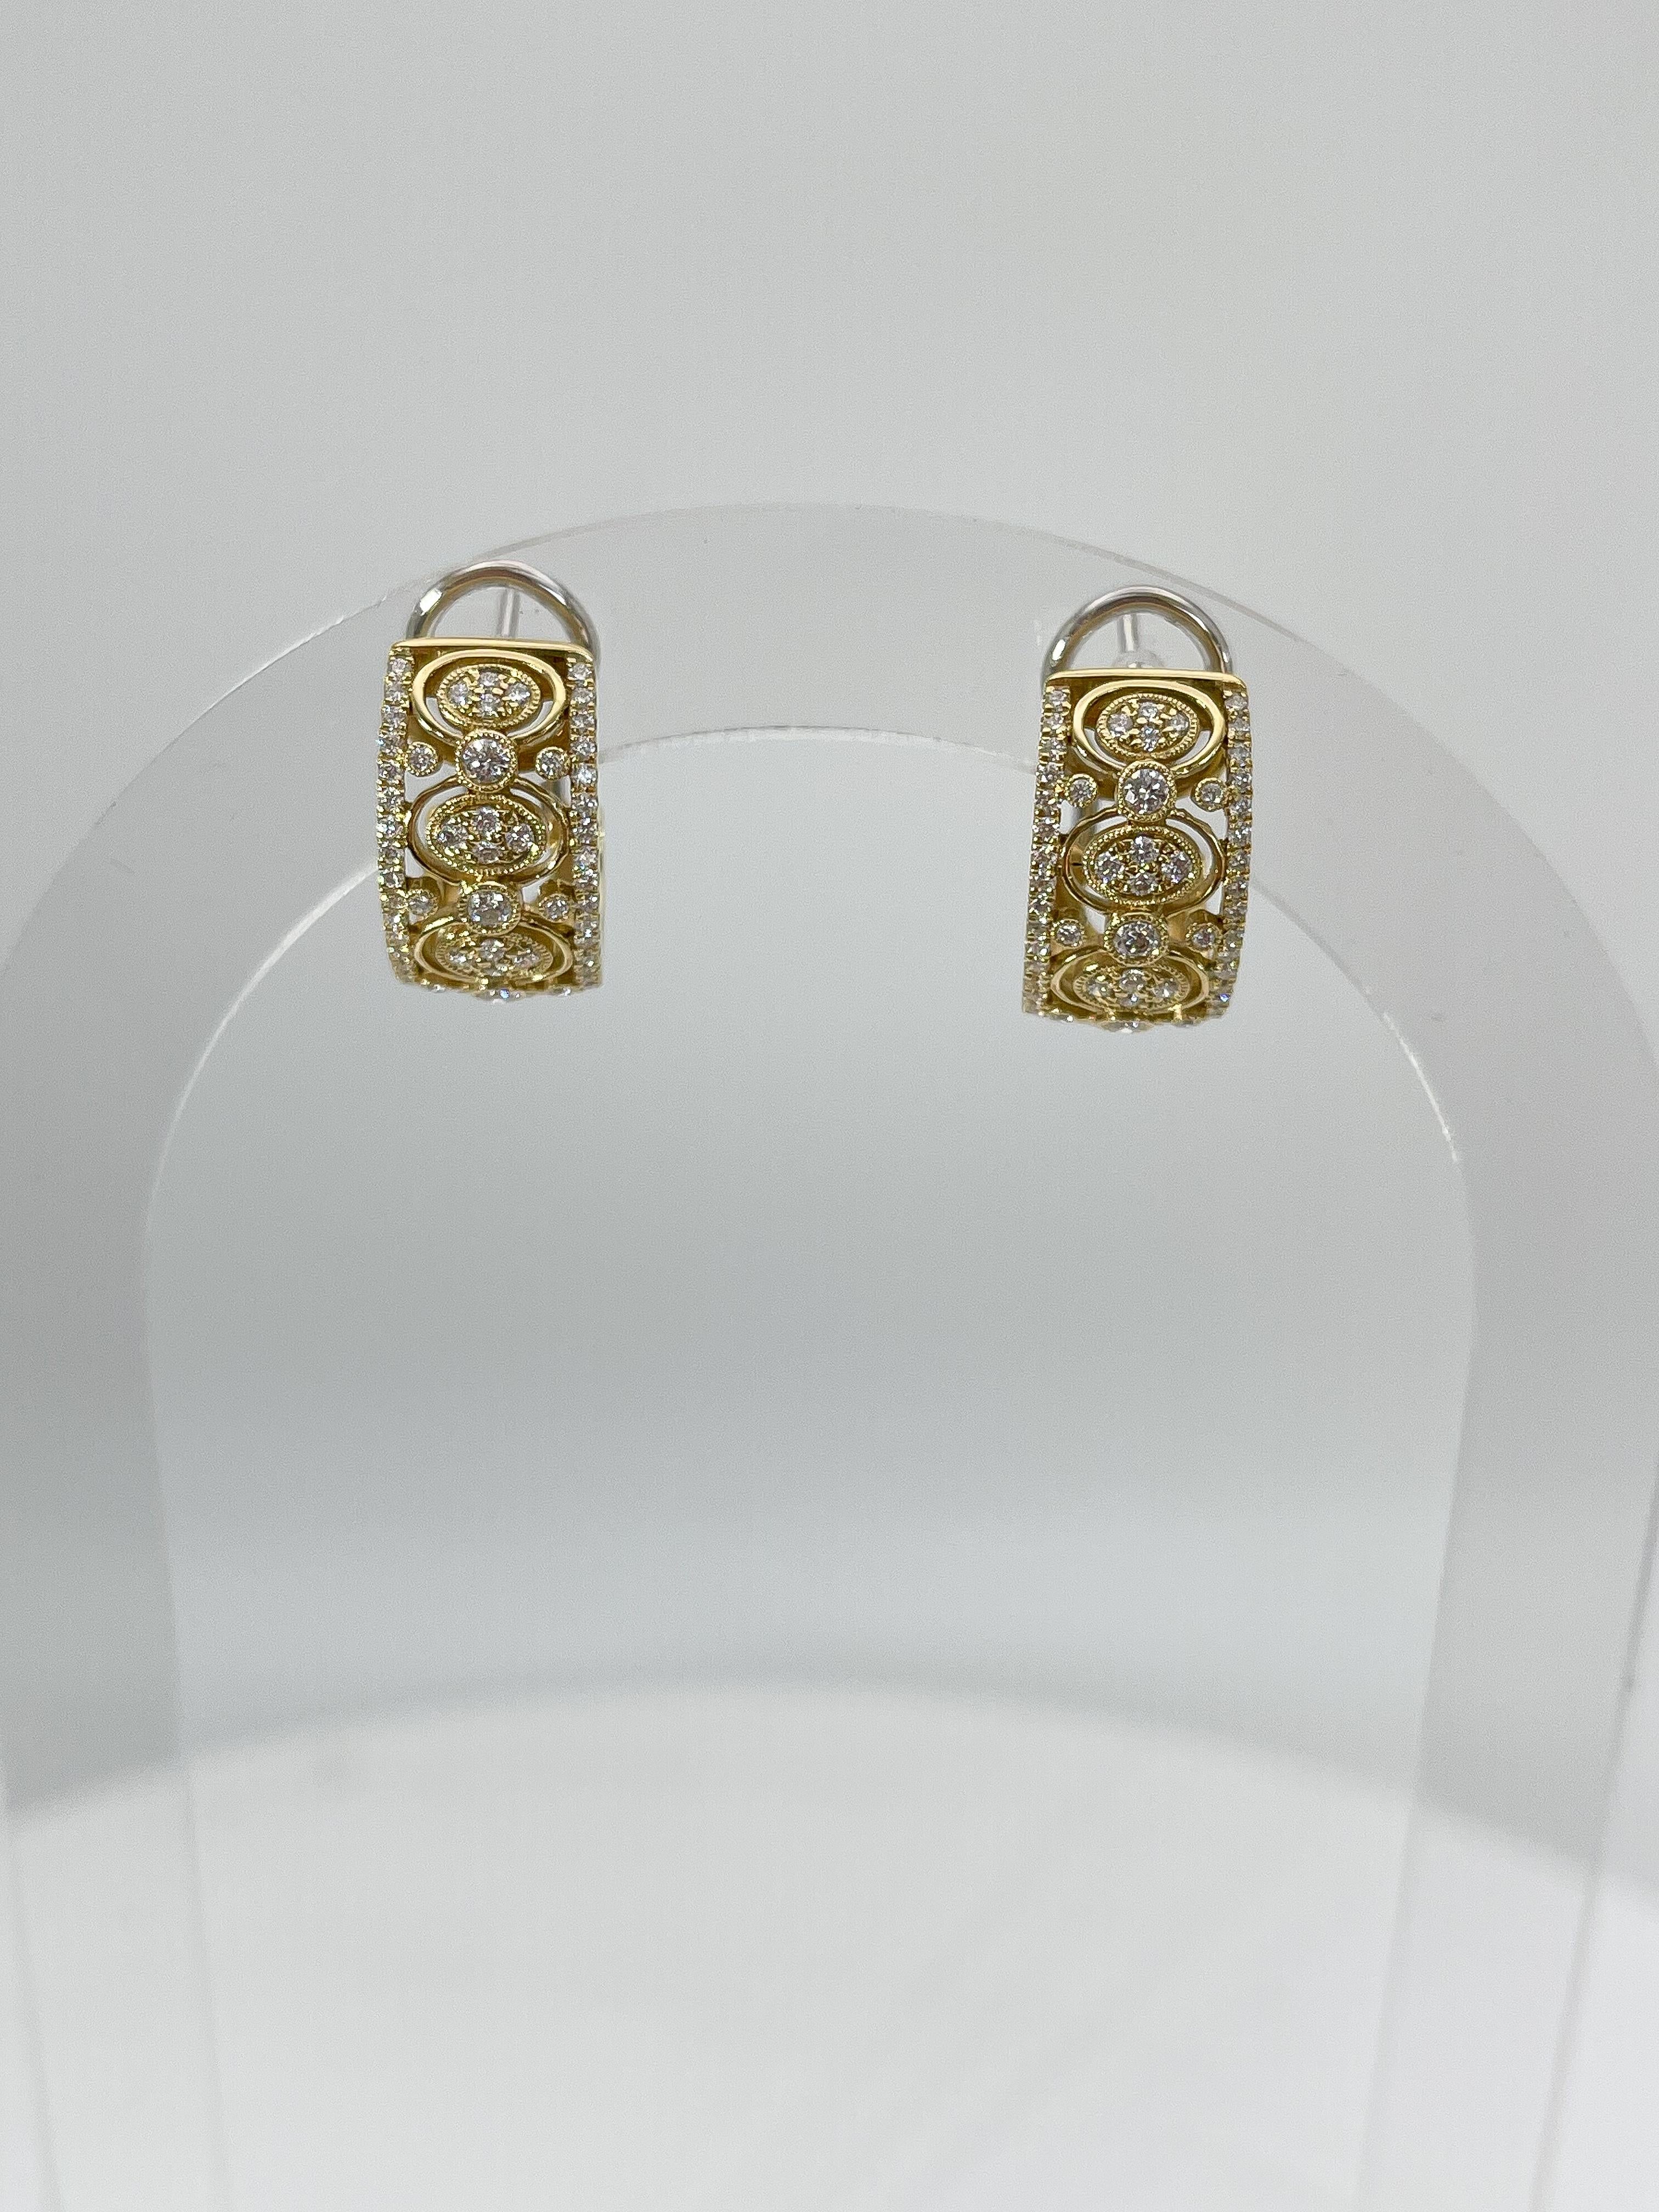 Simon G 18k yellow gold .70 CTW diamond fashion earrings. The diamonds in these earrings are all round, the measurements are 16.7 x 8.8 mm, they have a lever back for opening and closing, and they have a total weight of 8 grams.
Part number- LE2131